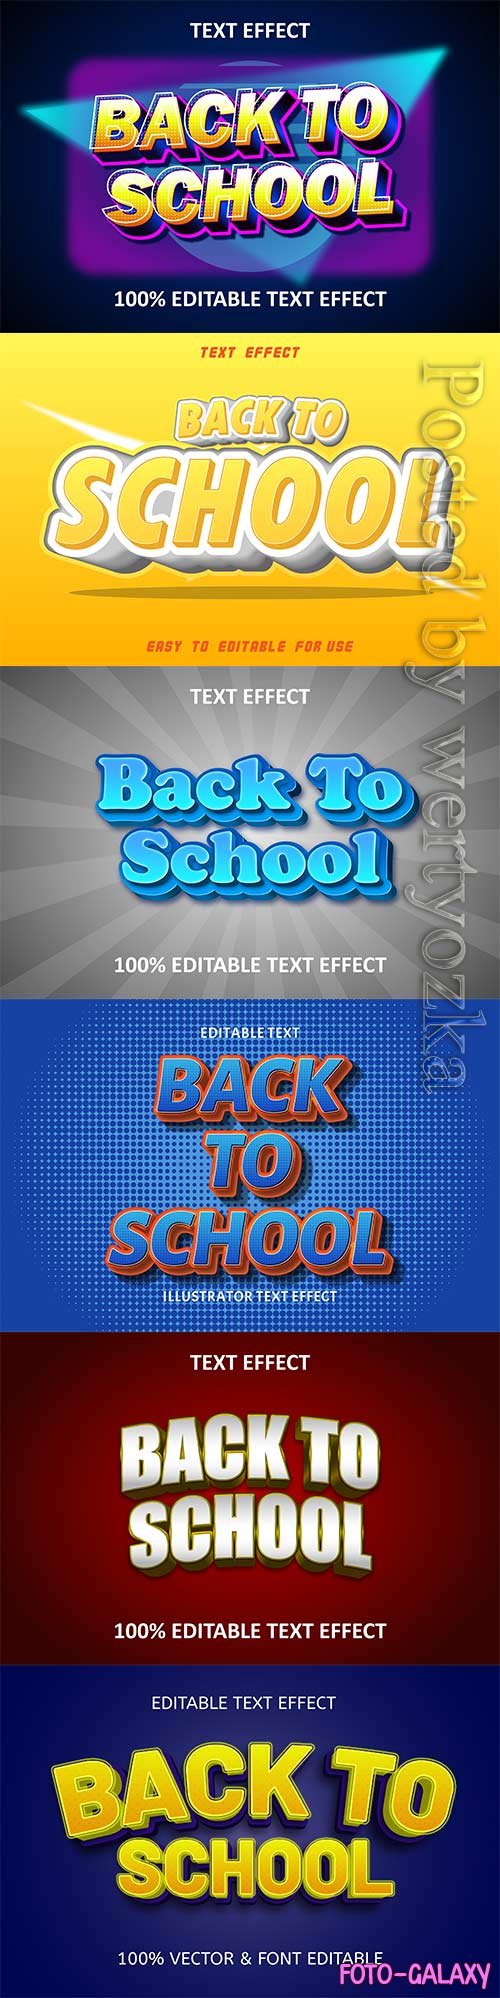 Back to school editable text effect vol 12